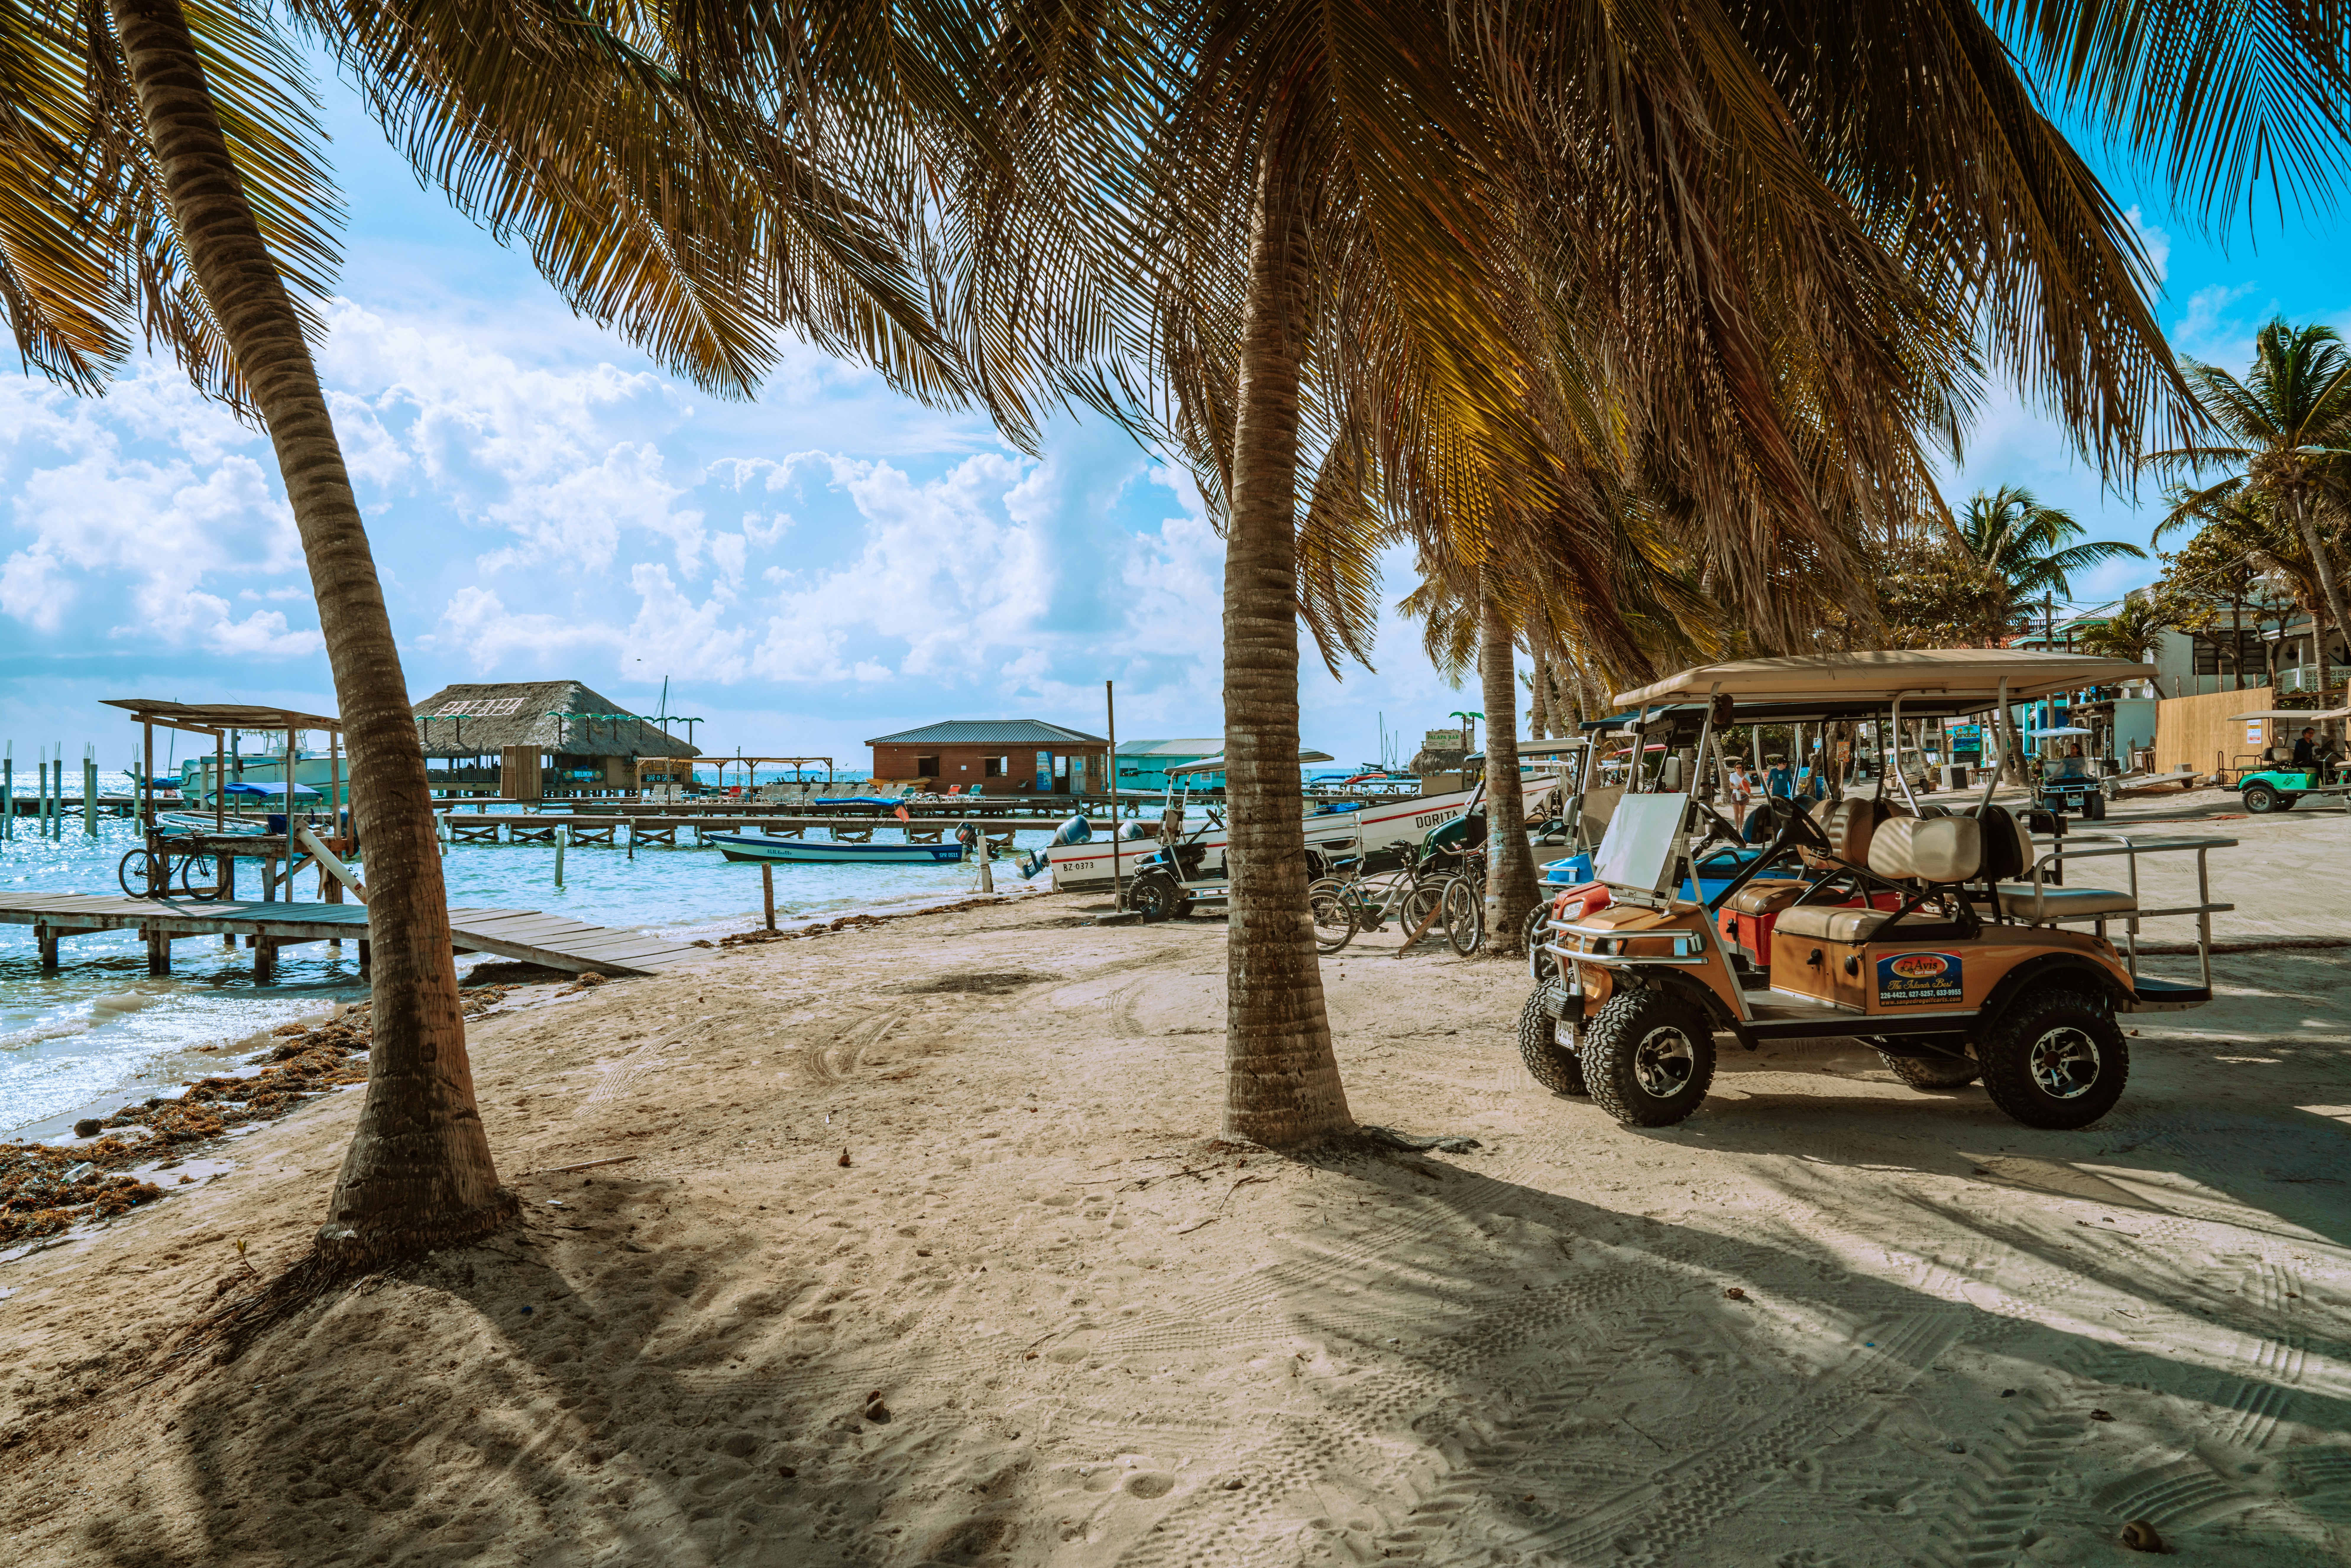 These travel advisories are the best resources for tourists wanting to visit Belize. 
pictured: the stunning beach of Belize surrounded by palm trees and the vehicles of visitors